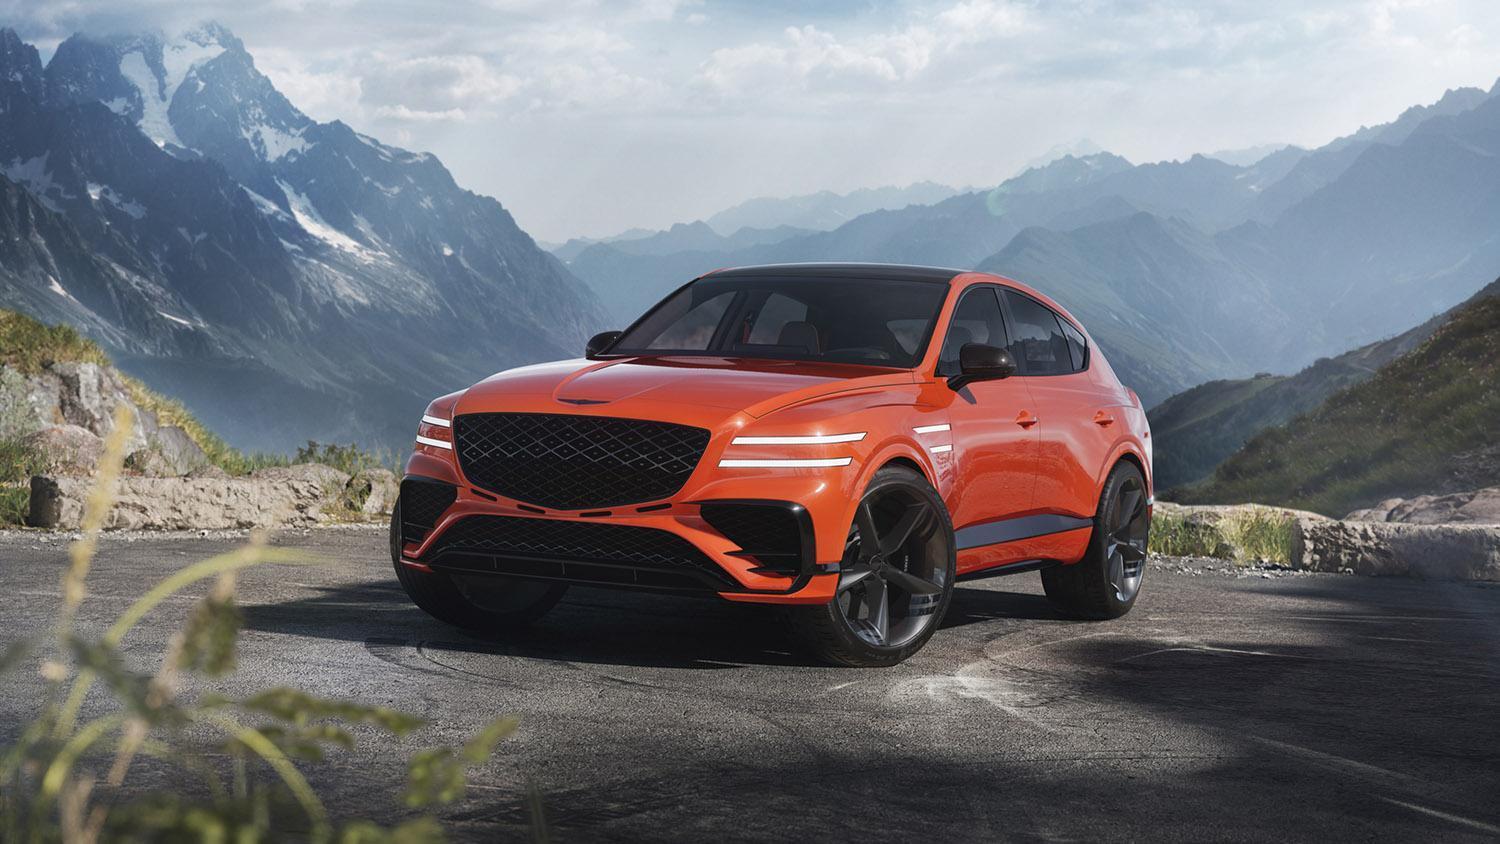 Genesis GV80 Coupe Concept in orange on a picturesque mountain turnout.